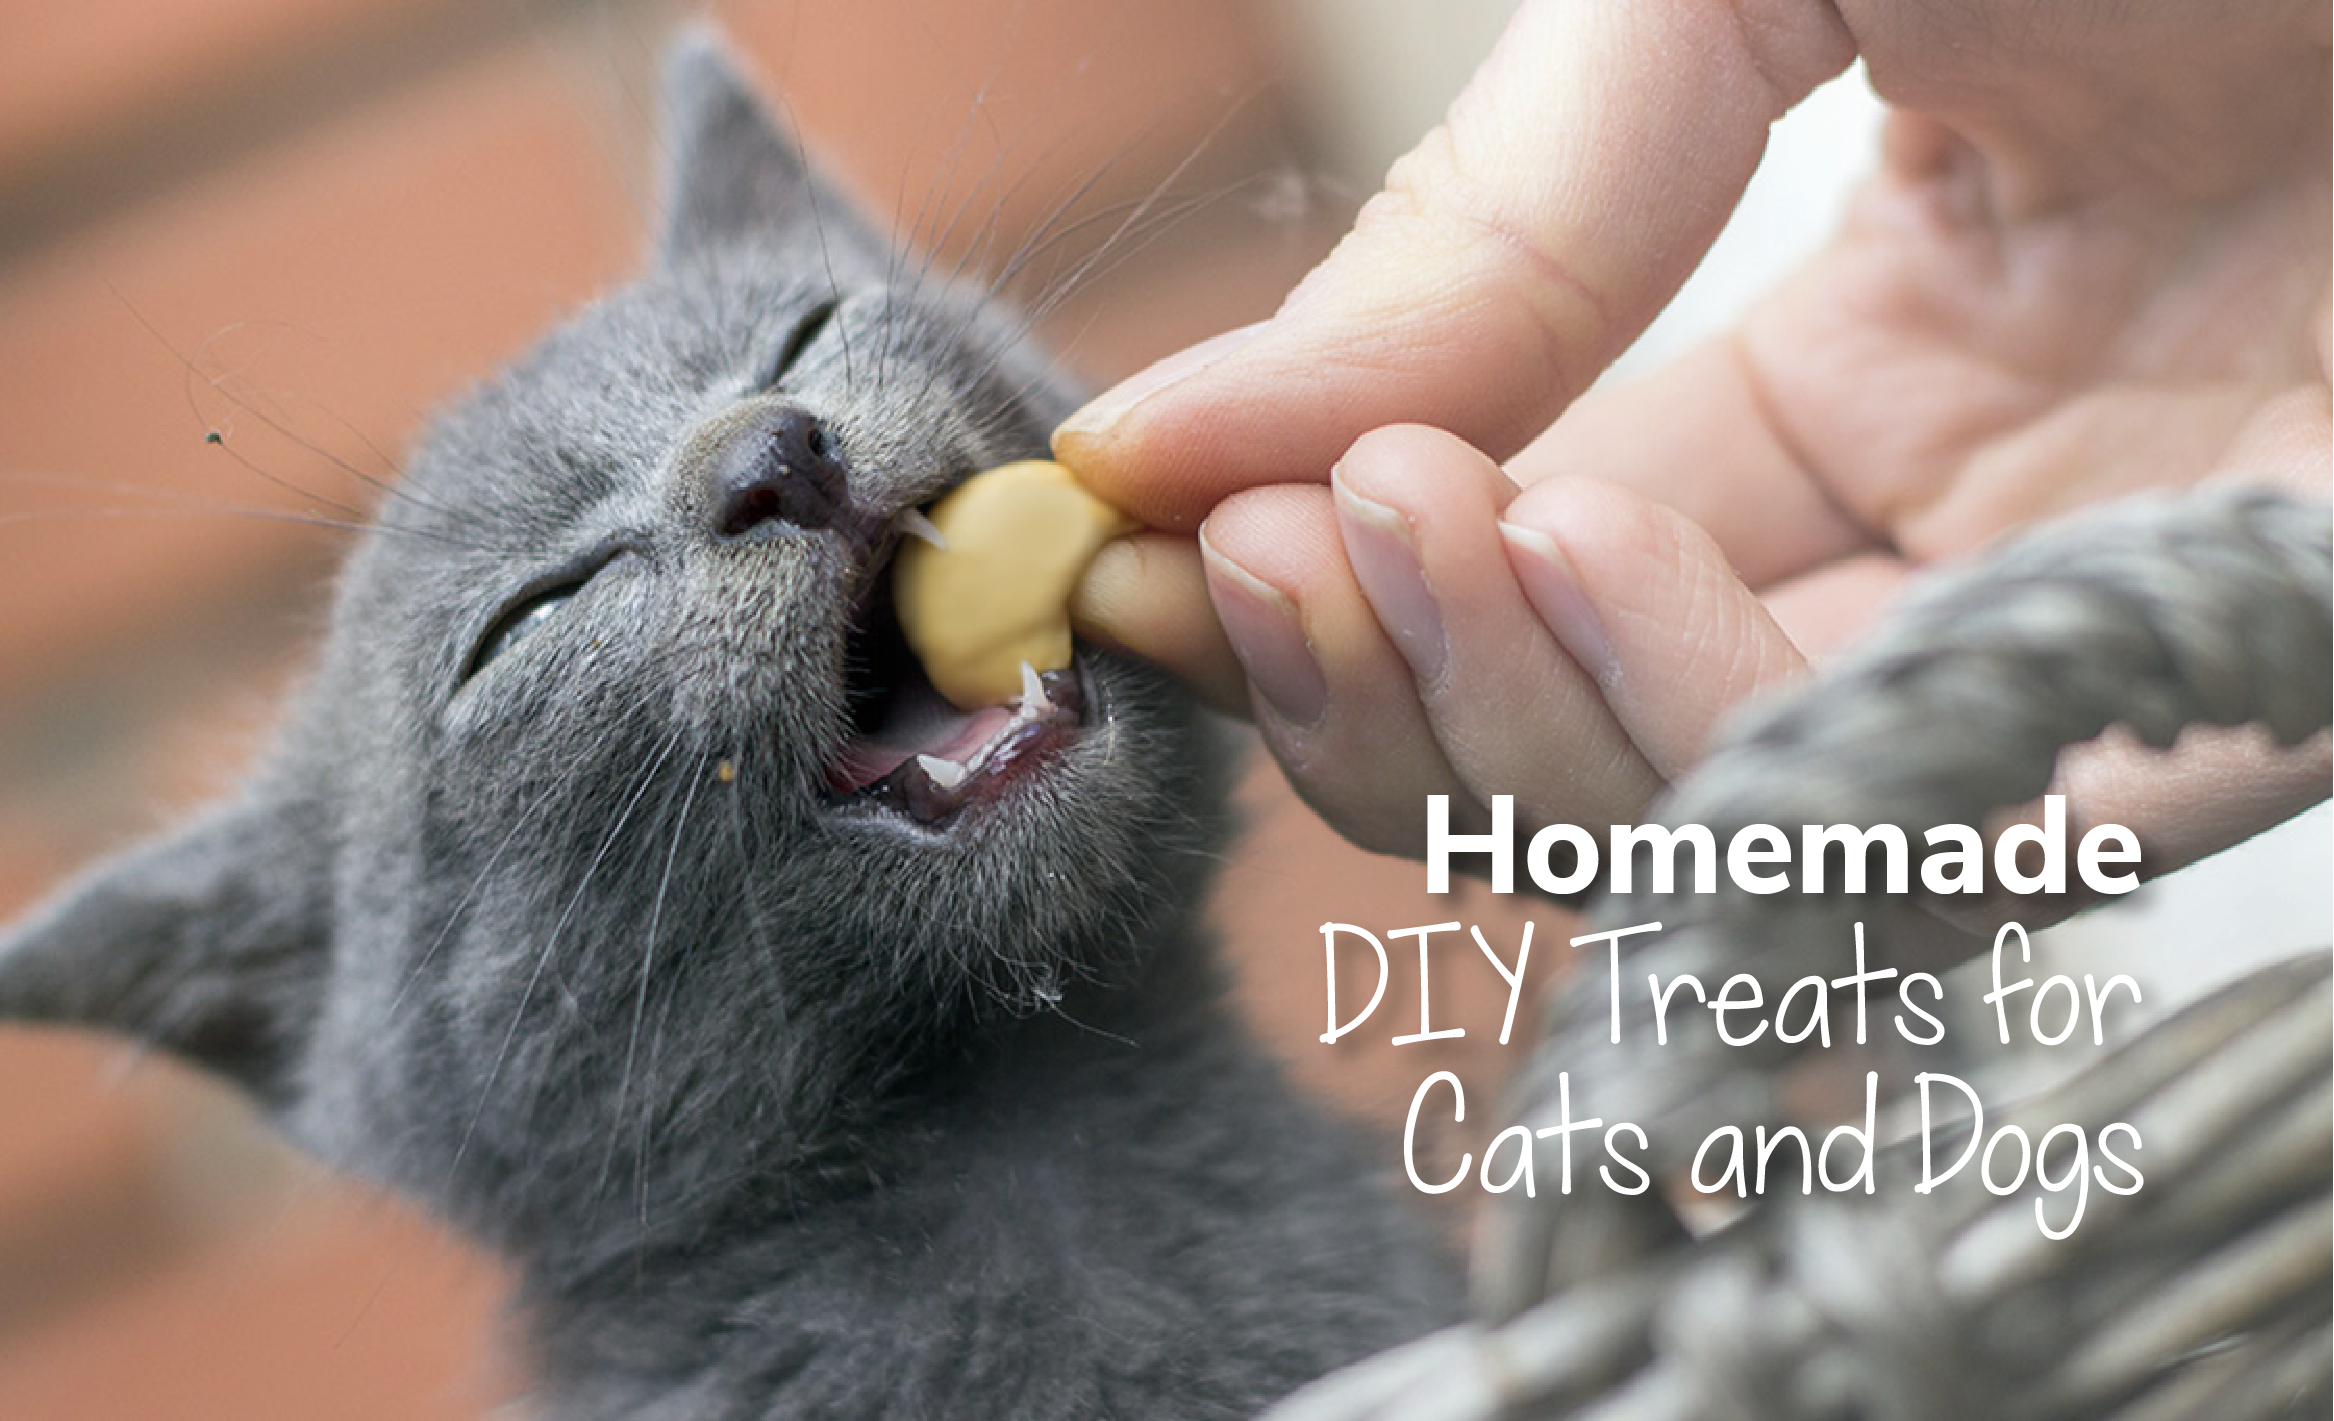 Homemade DIY Treats for Cats and Dogs